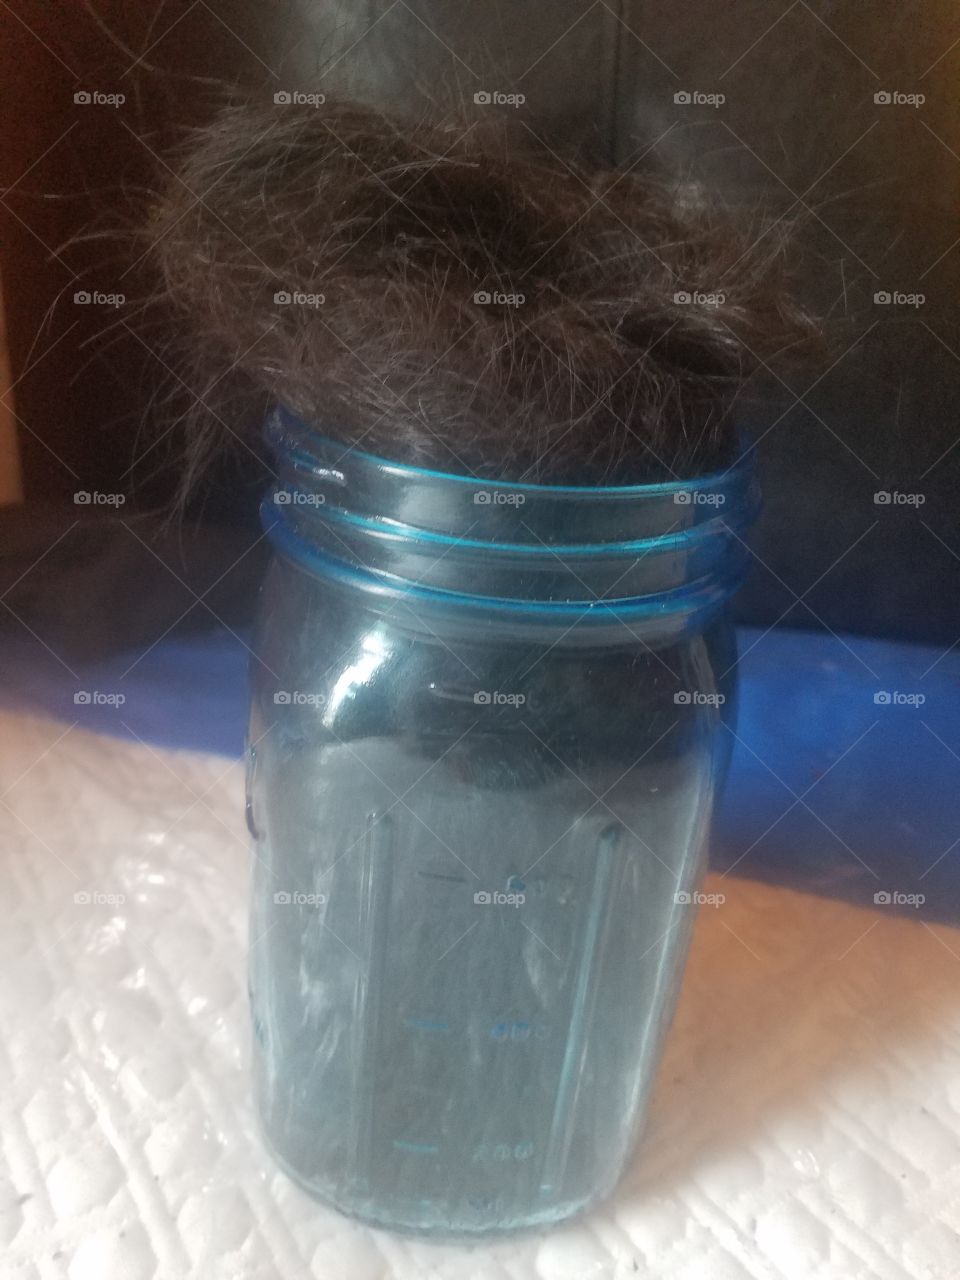 hair off after 2 years of growing it